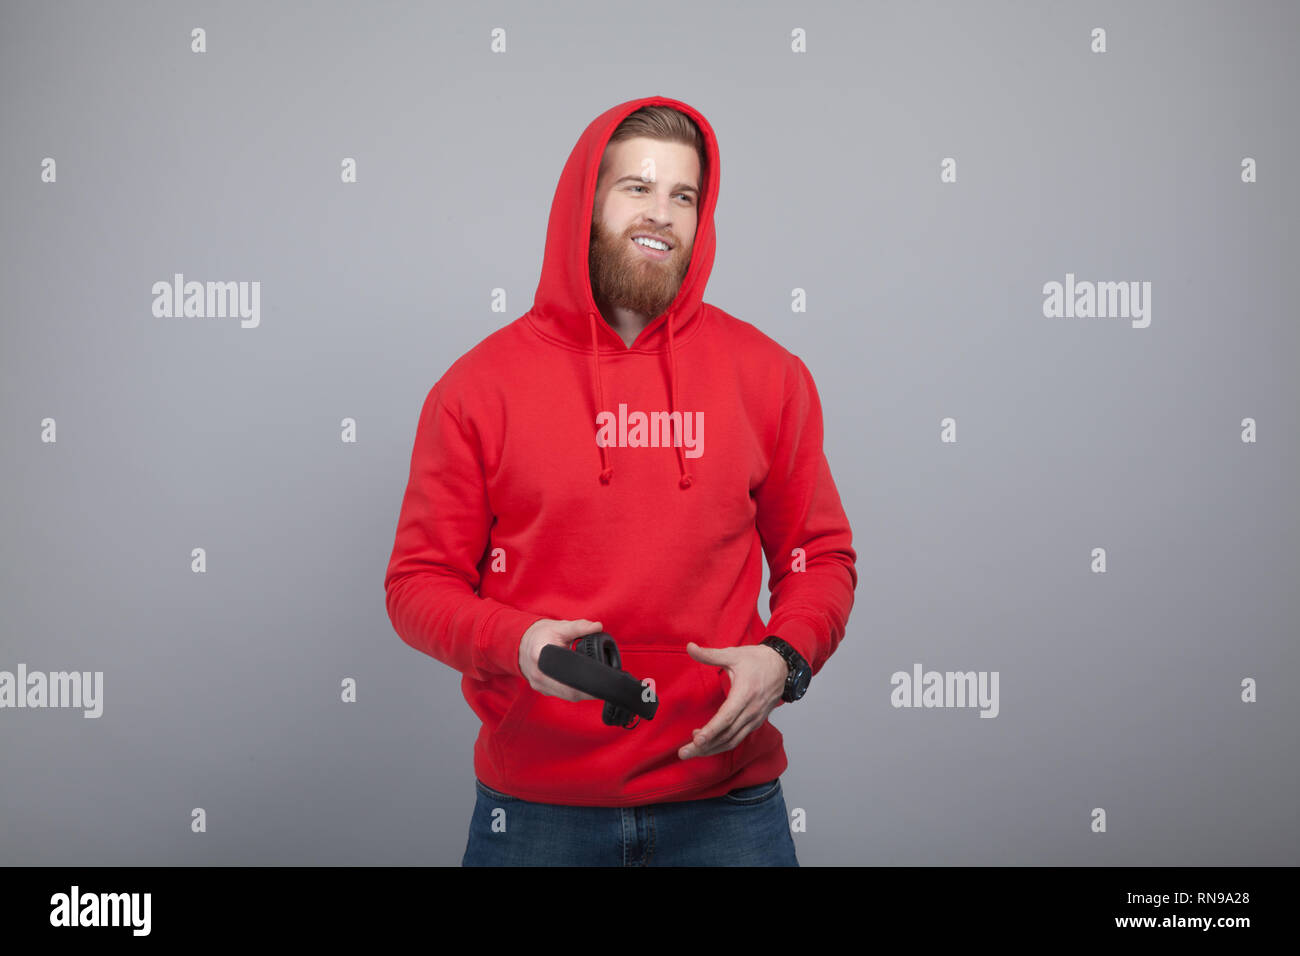 young handsome smiling bearded man in red hoodie on holding headphones in his hands standing at the grey background and looking to the camera. Stock Photo